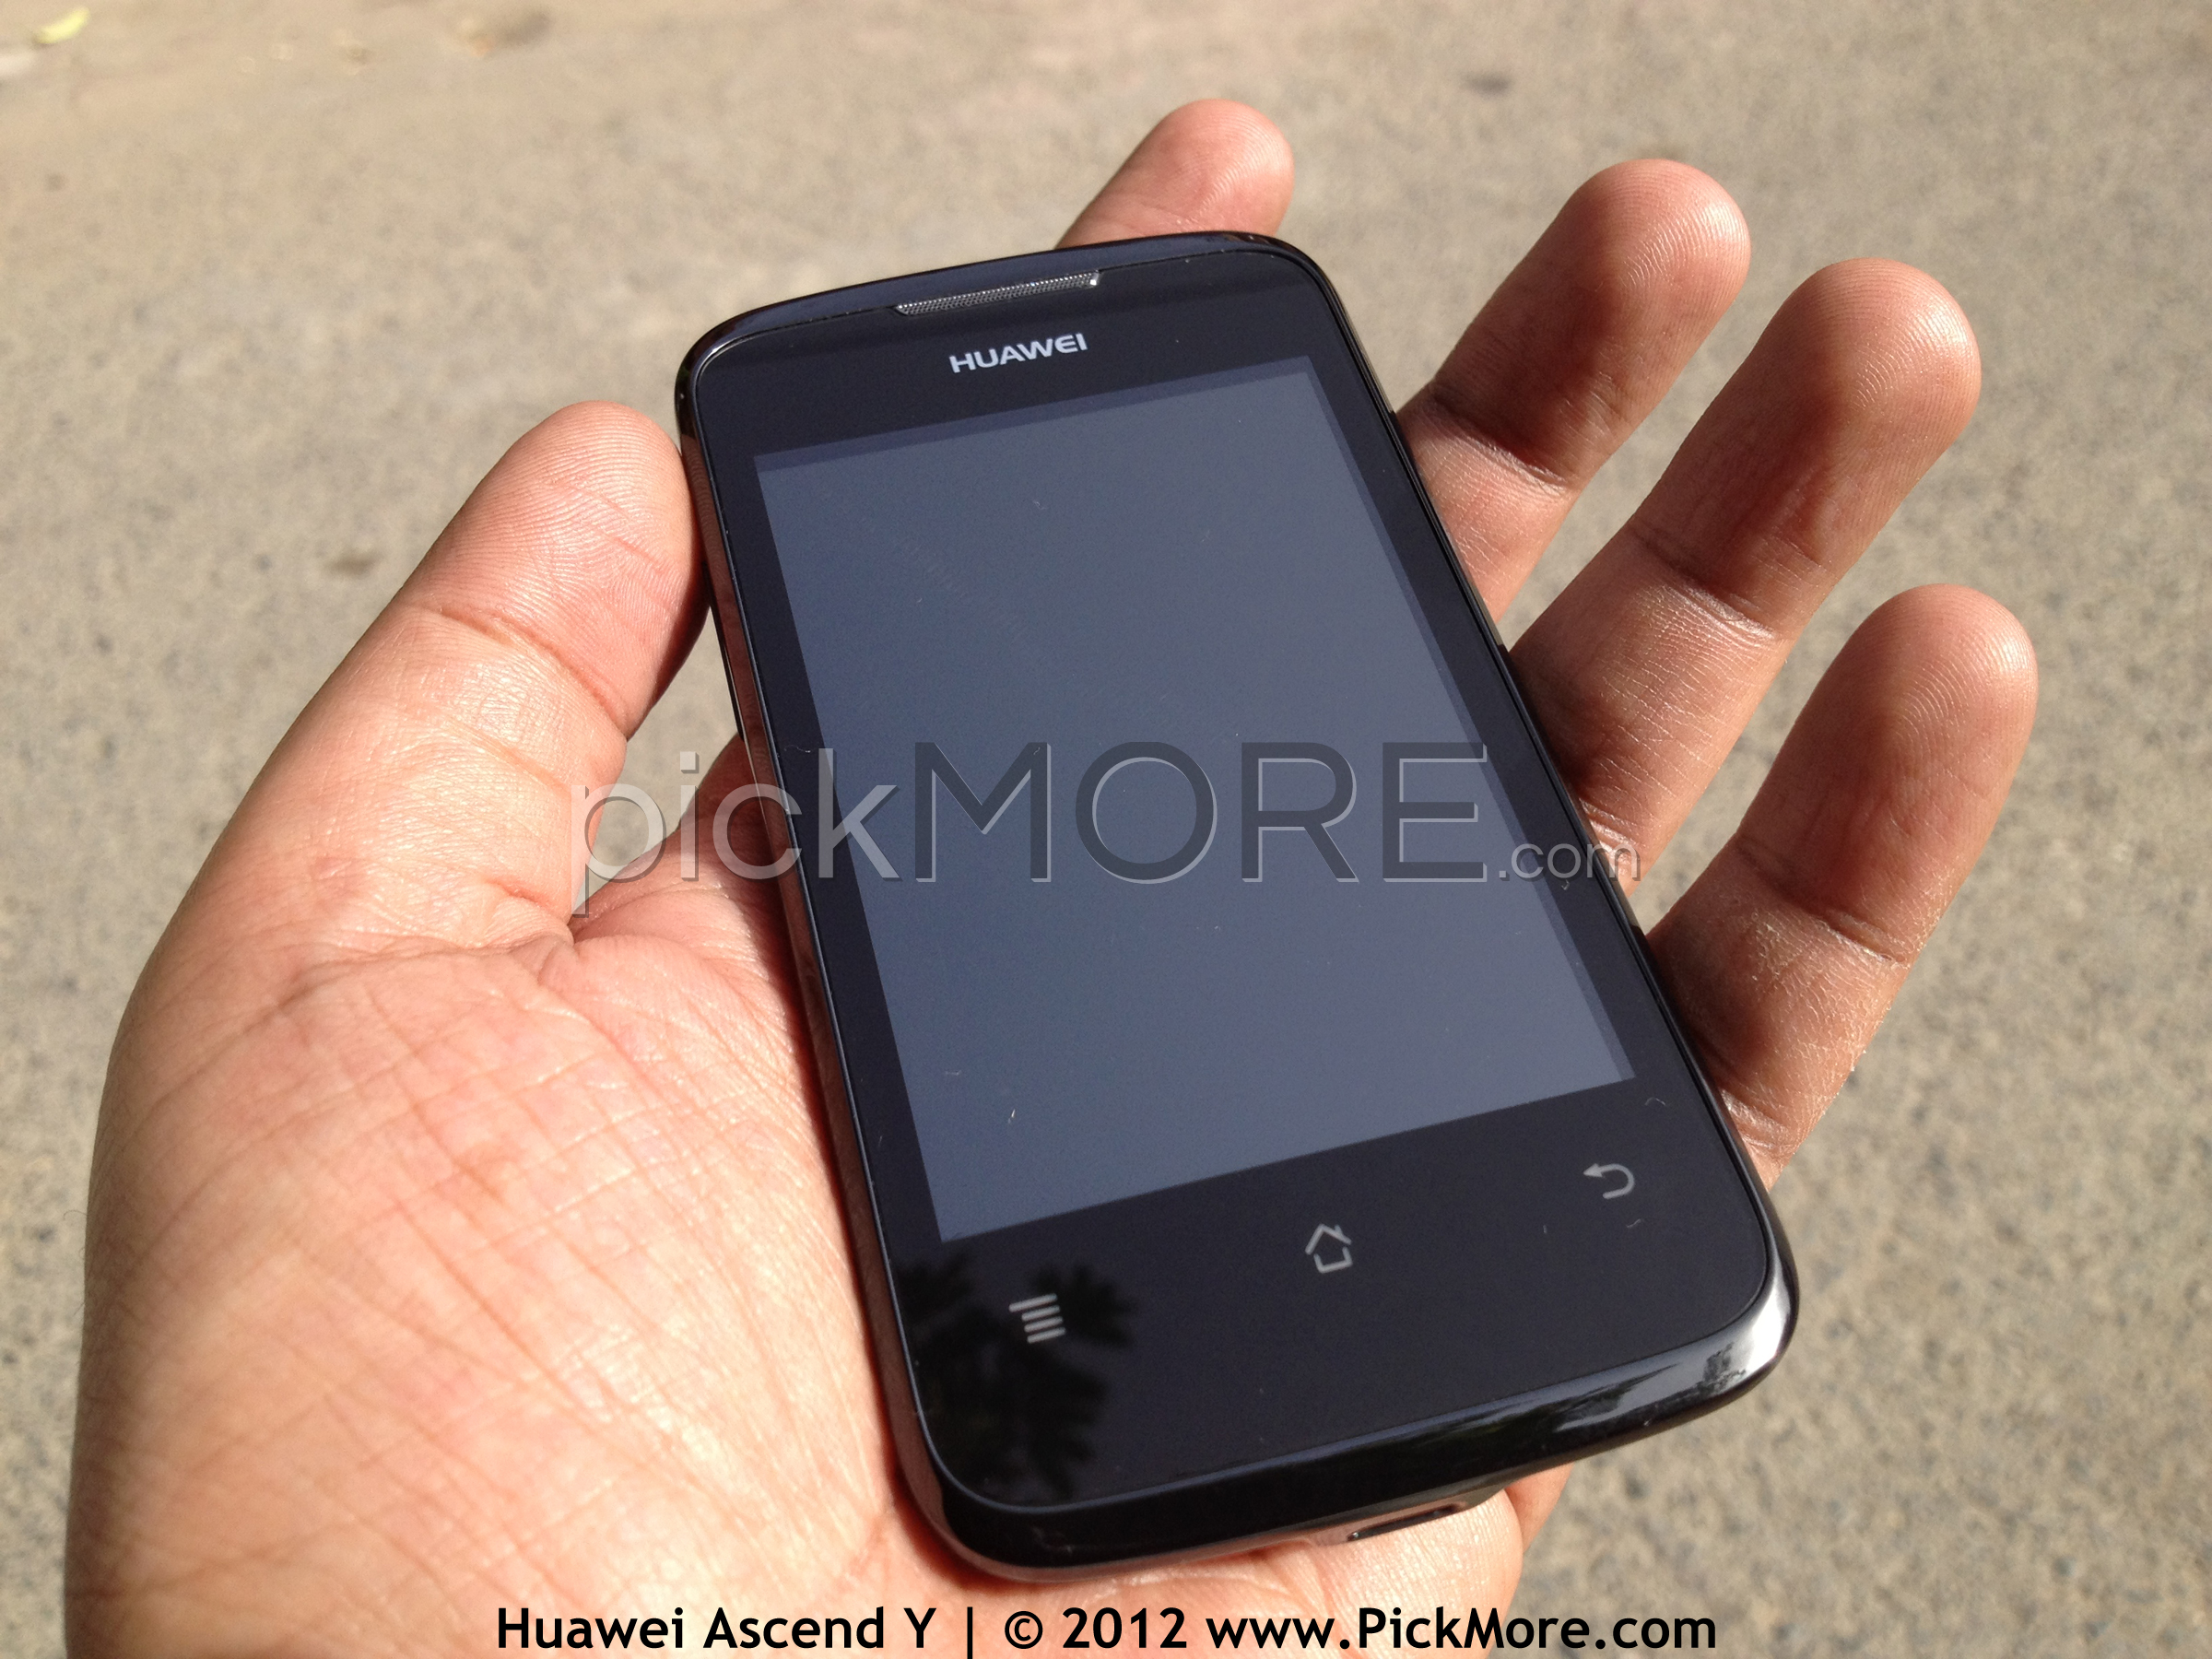 Hands on: Huawei Ascend Y 200 Mid-Range Android Smartphone